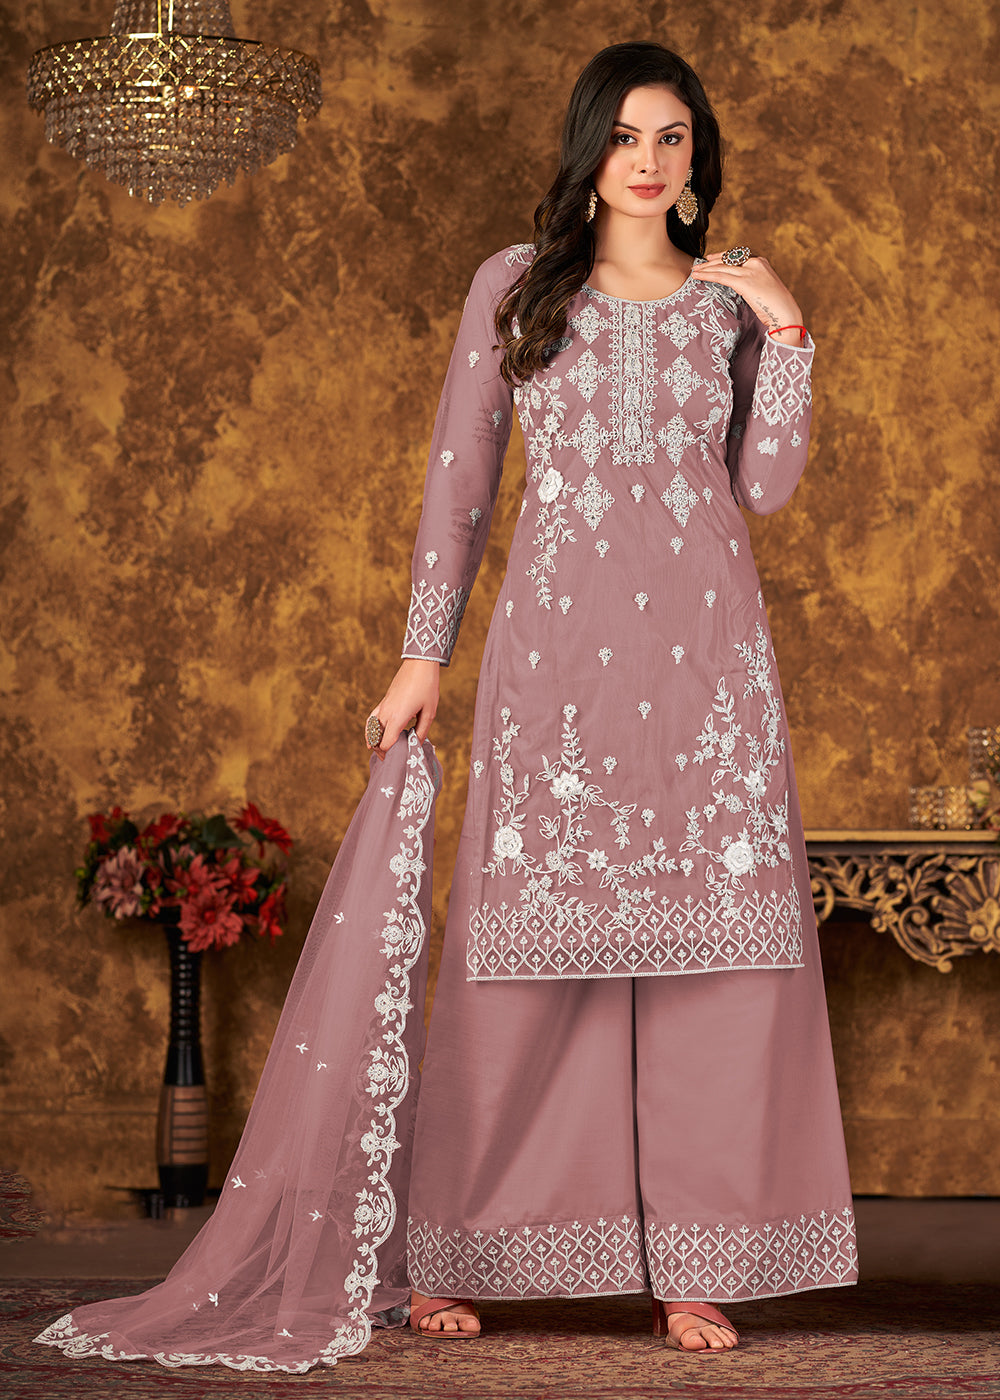 Buy Now Pretty Mauve Cording Embroidered Net Palazzo Salwar Suit Online in USA, UK, Canada & Worldwide at Empress Clothing. 